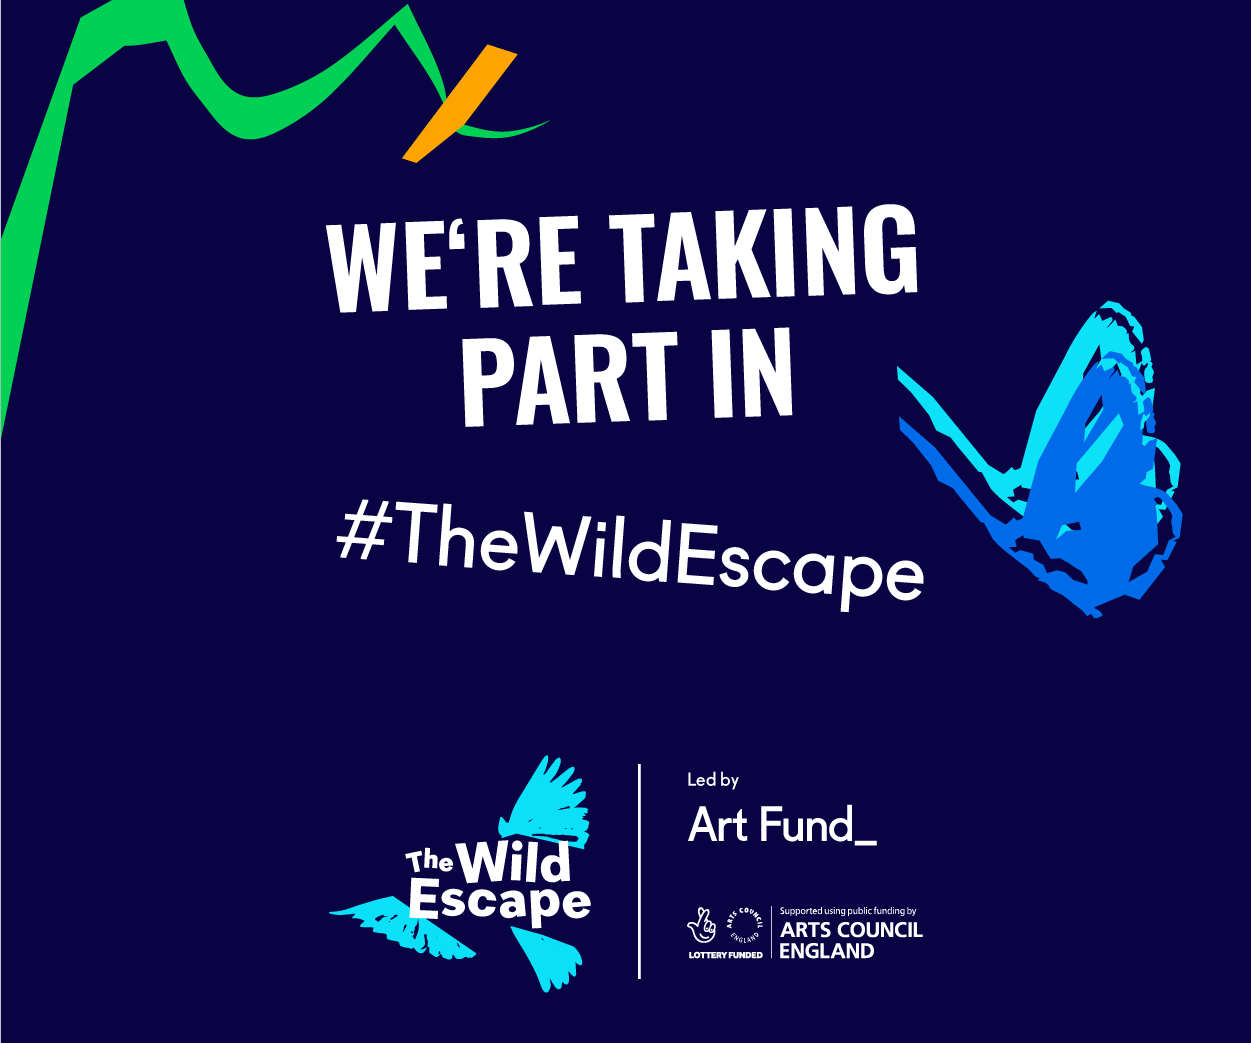 A marketing campaign advertising The Wild Escape scheme by Art Fund. There is overlayed text: We're taking part in #TheWildEscape